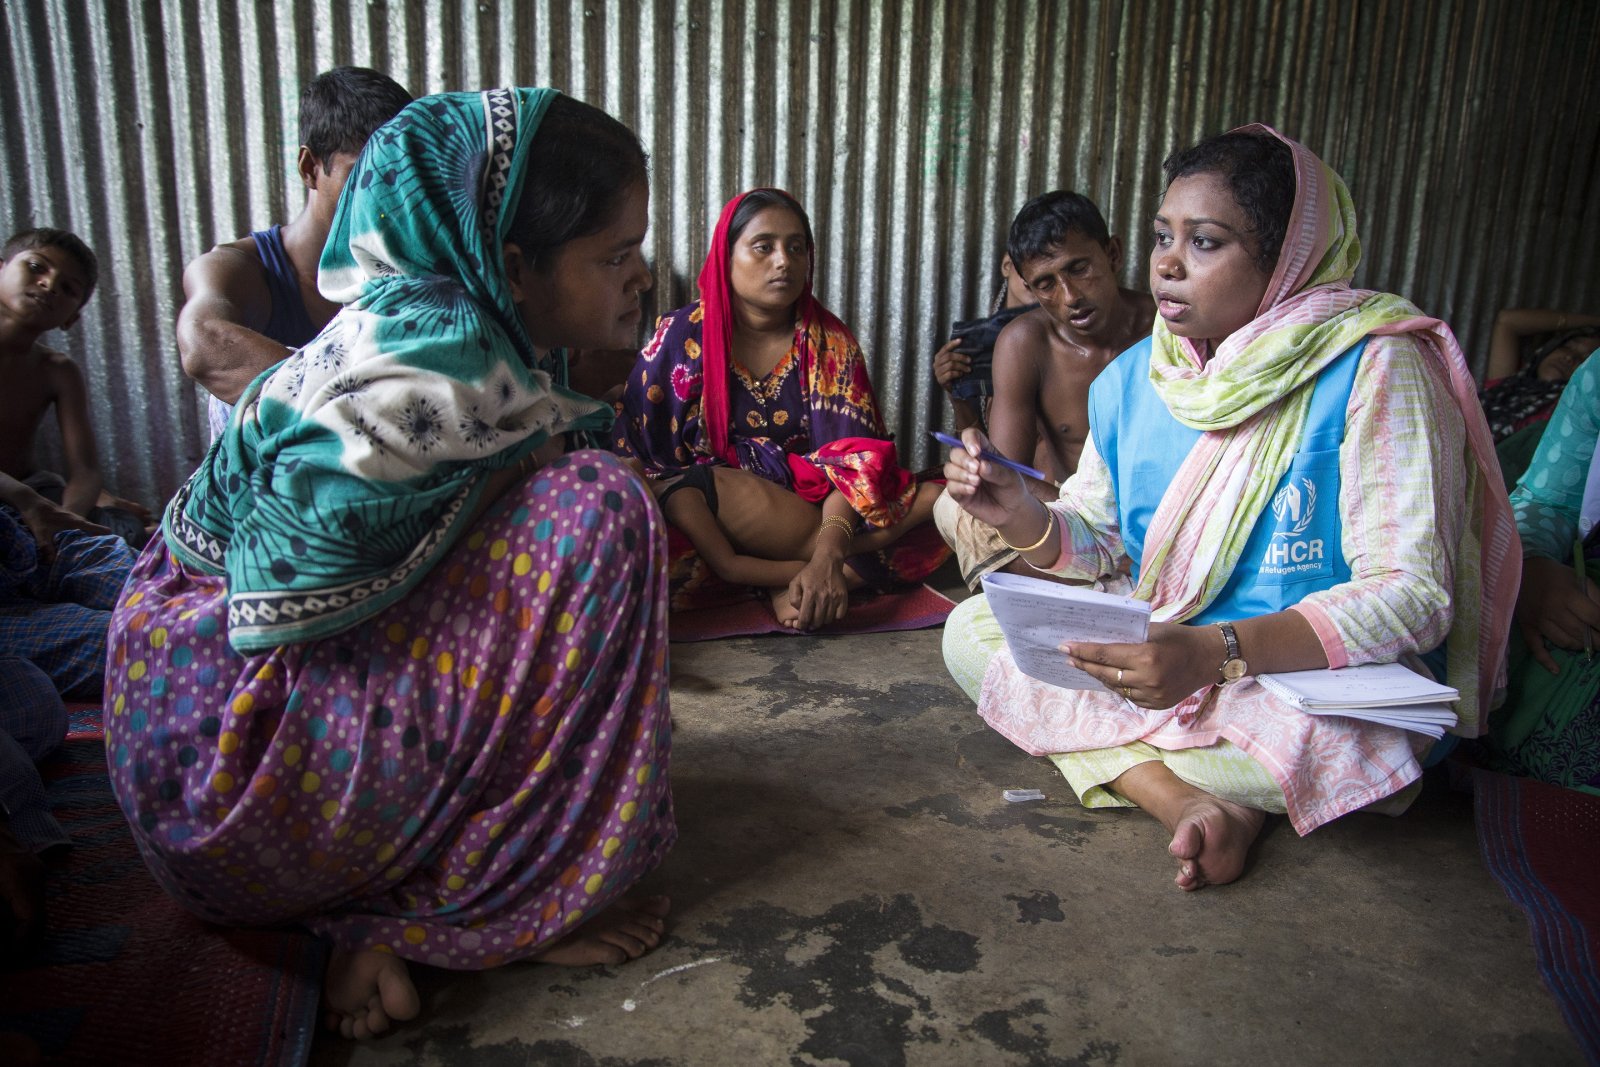 Rashida Begum, 23, a Rohingya shipwreck survivor who lost relatives when her boat capsized on Inani Beach near Cox’s Bazar, receives counselling from UNHCR psychologist Mahmuda at Kutupalong refugee camp in Bangladesh. Photographer Roger Arnold